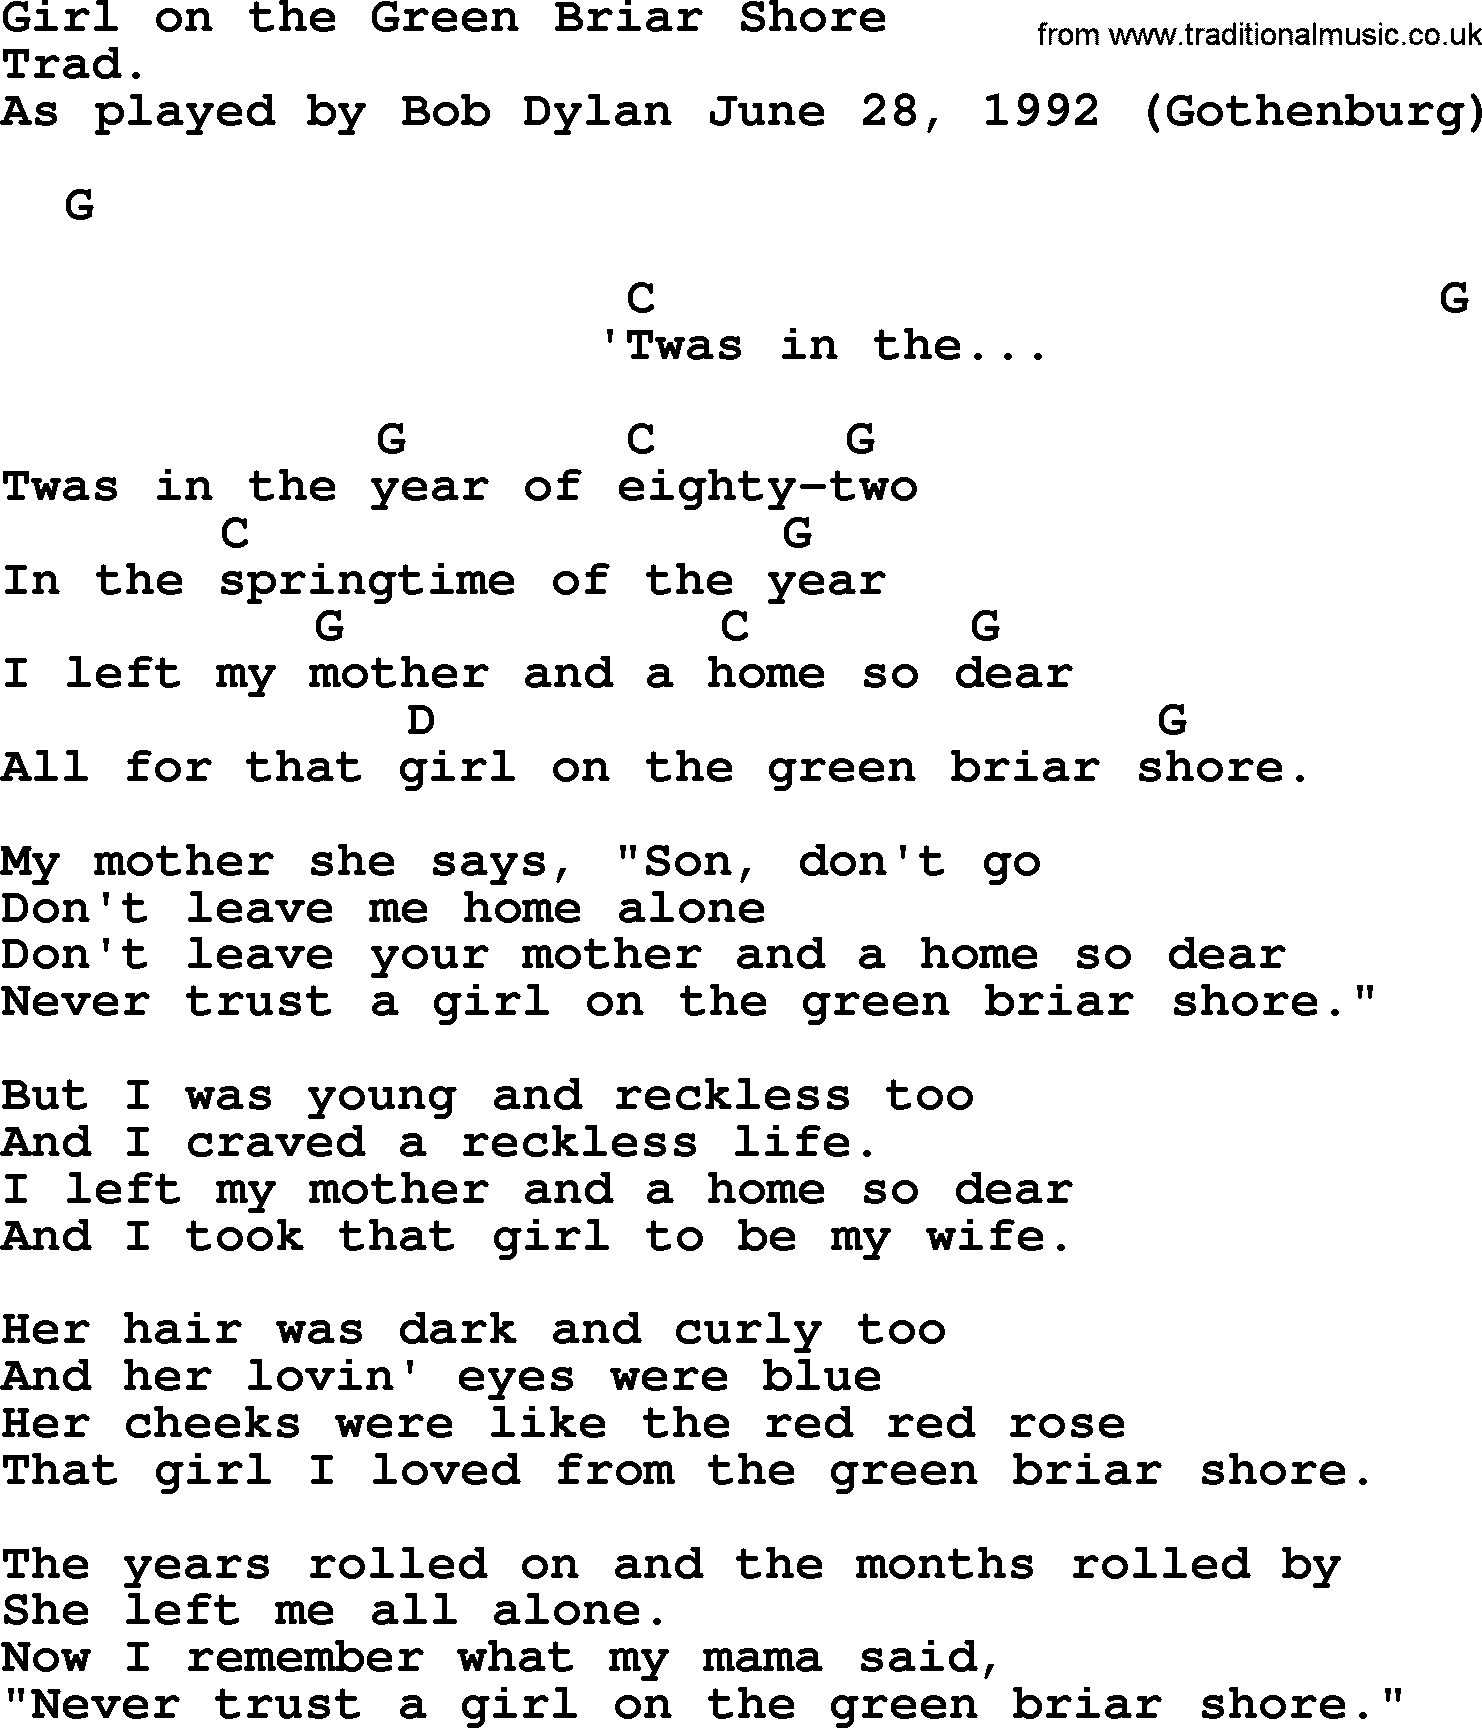 Bob Dylan song, lyrics with chords - Girl on the Green Briar Shore